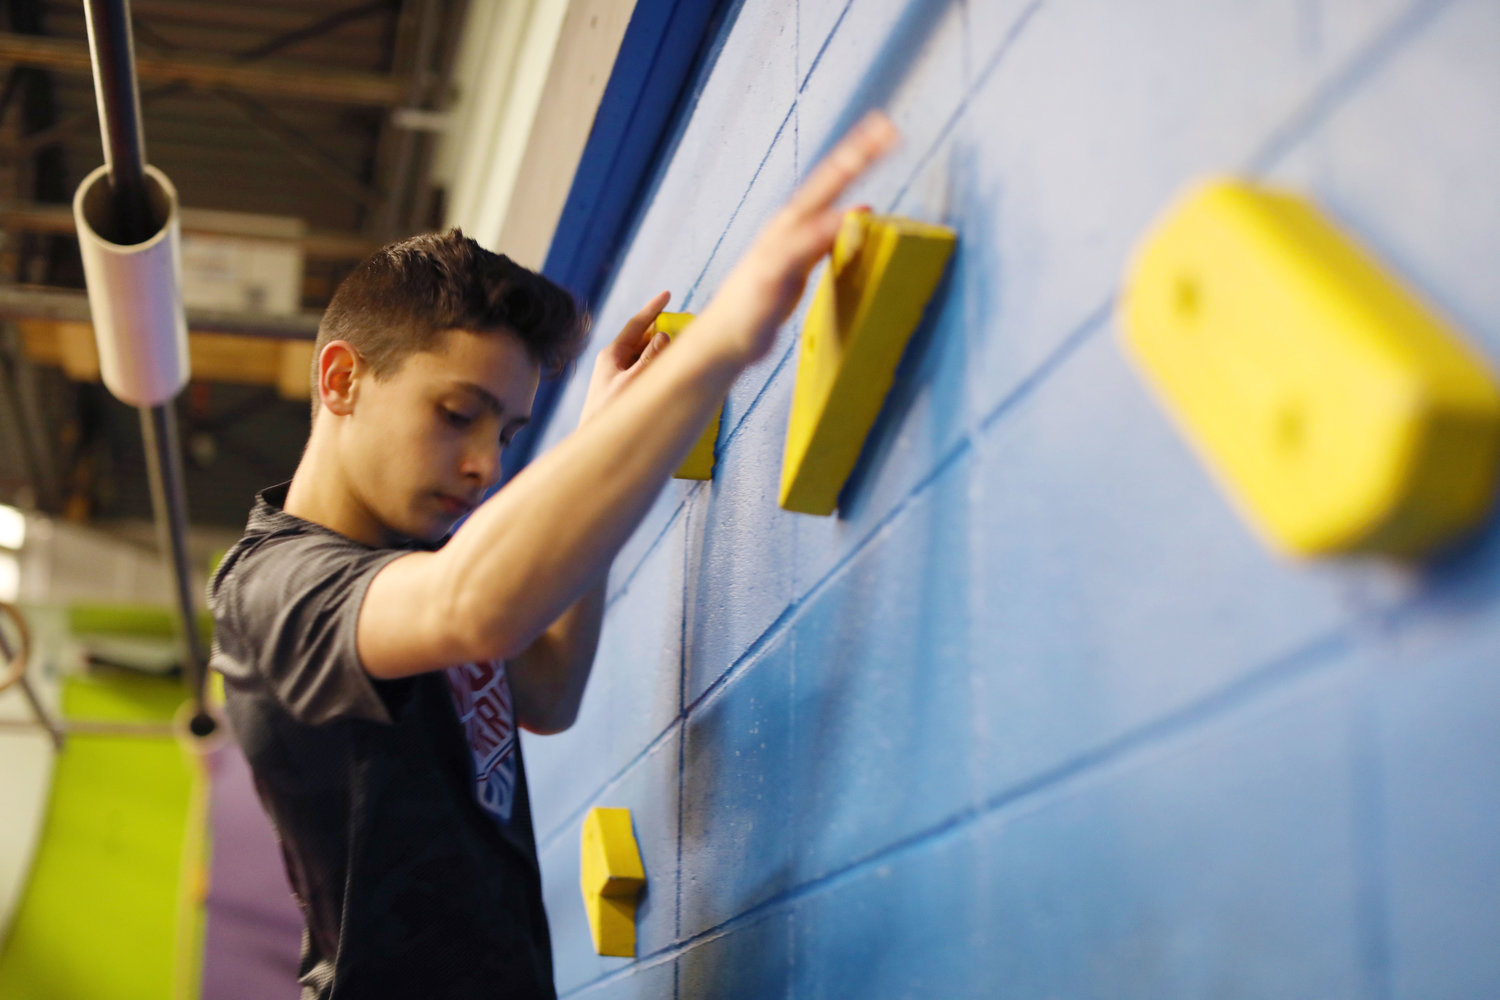 Carson Dean, 13, trains at his at his gym Laid-back Fitness in Warwick.